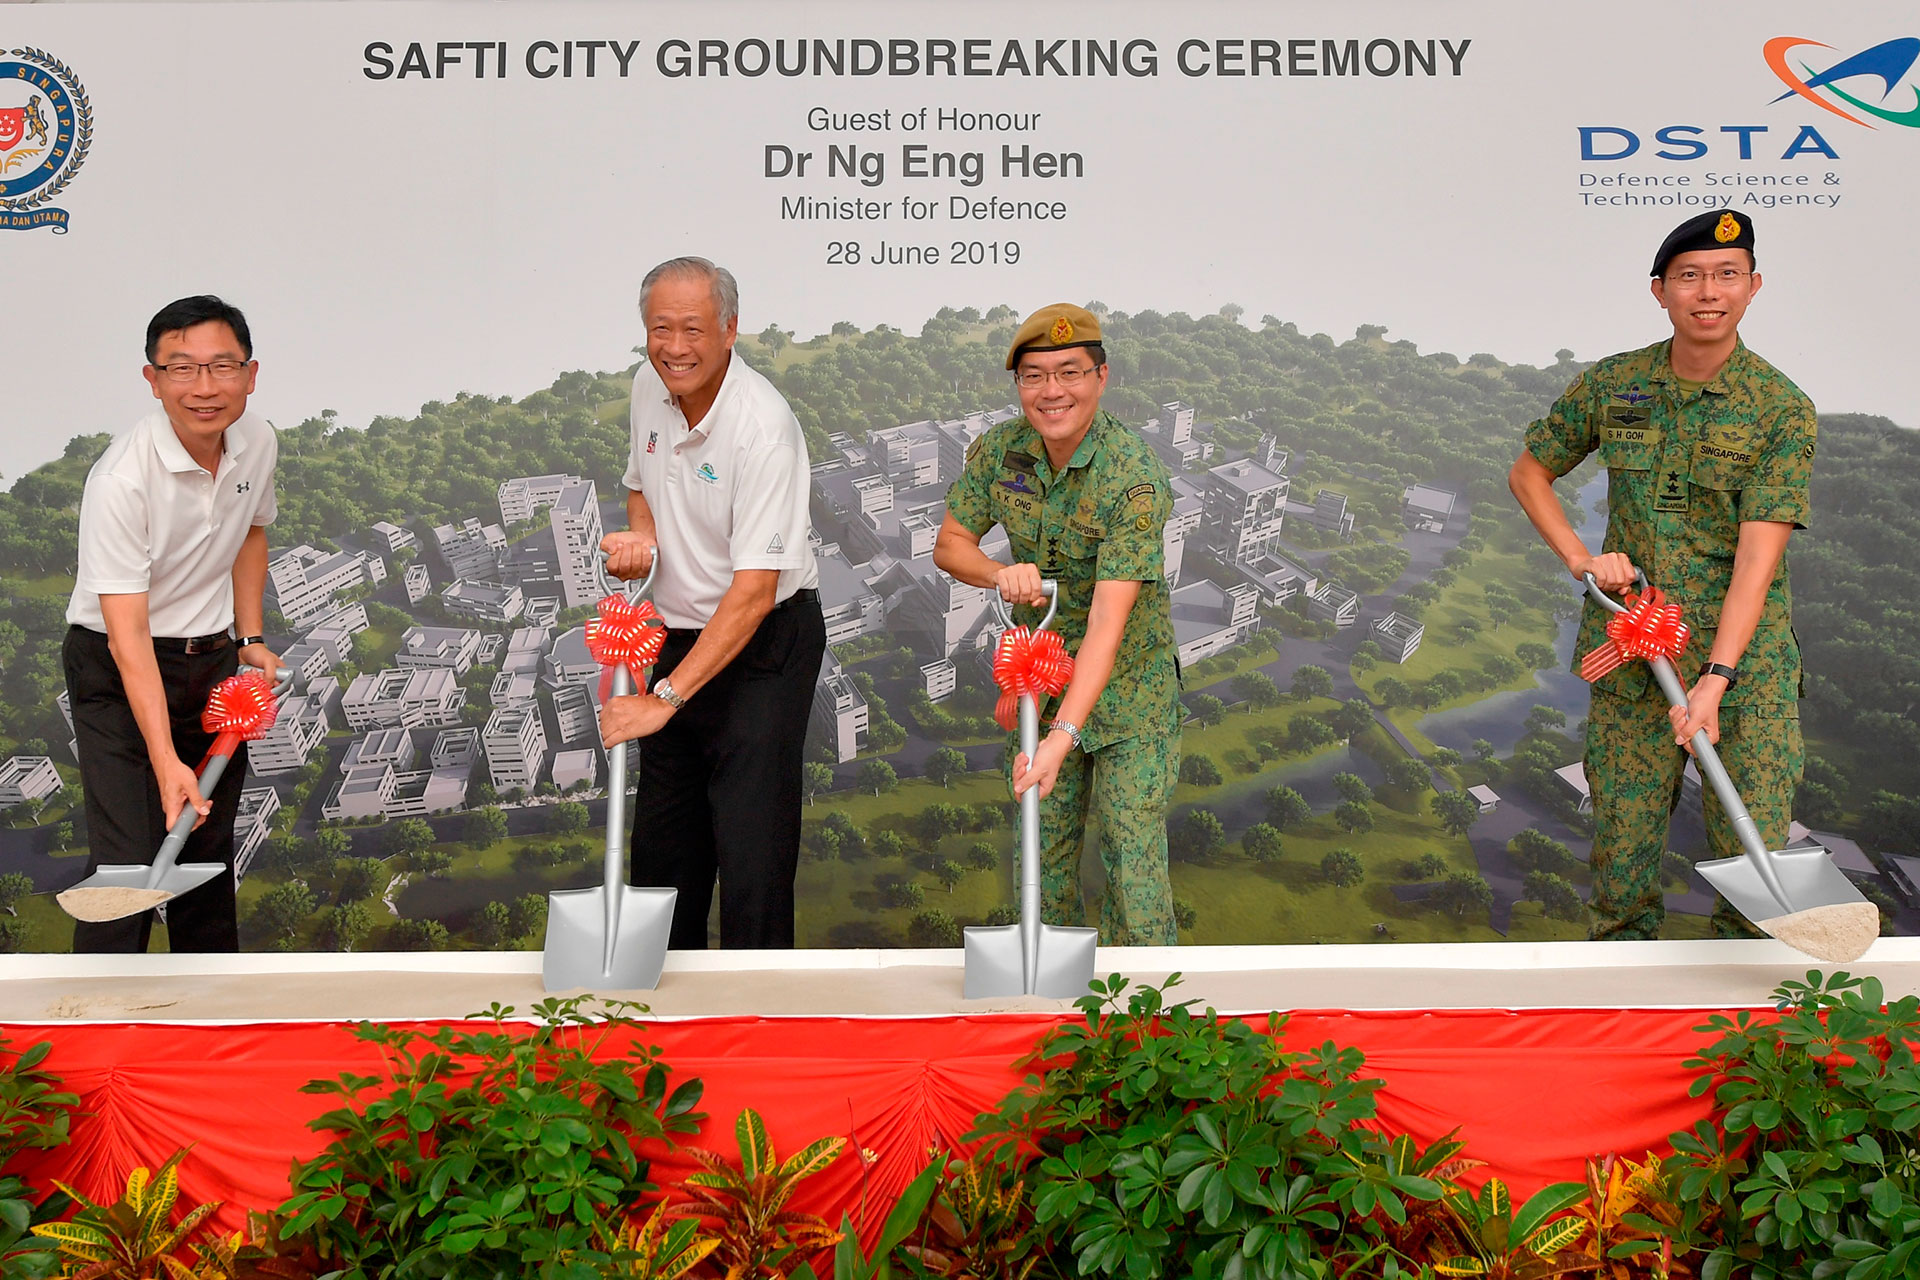 Minister for Defence Dr Ng Eng Hen (second from left) participating in the symbolic sod-turning at the SAFTI City Groundbreaking Ceremony.